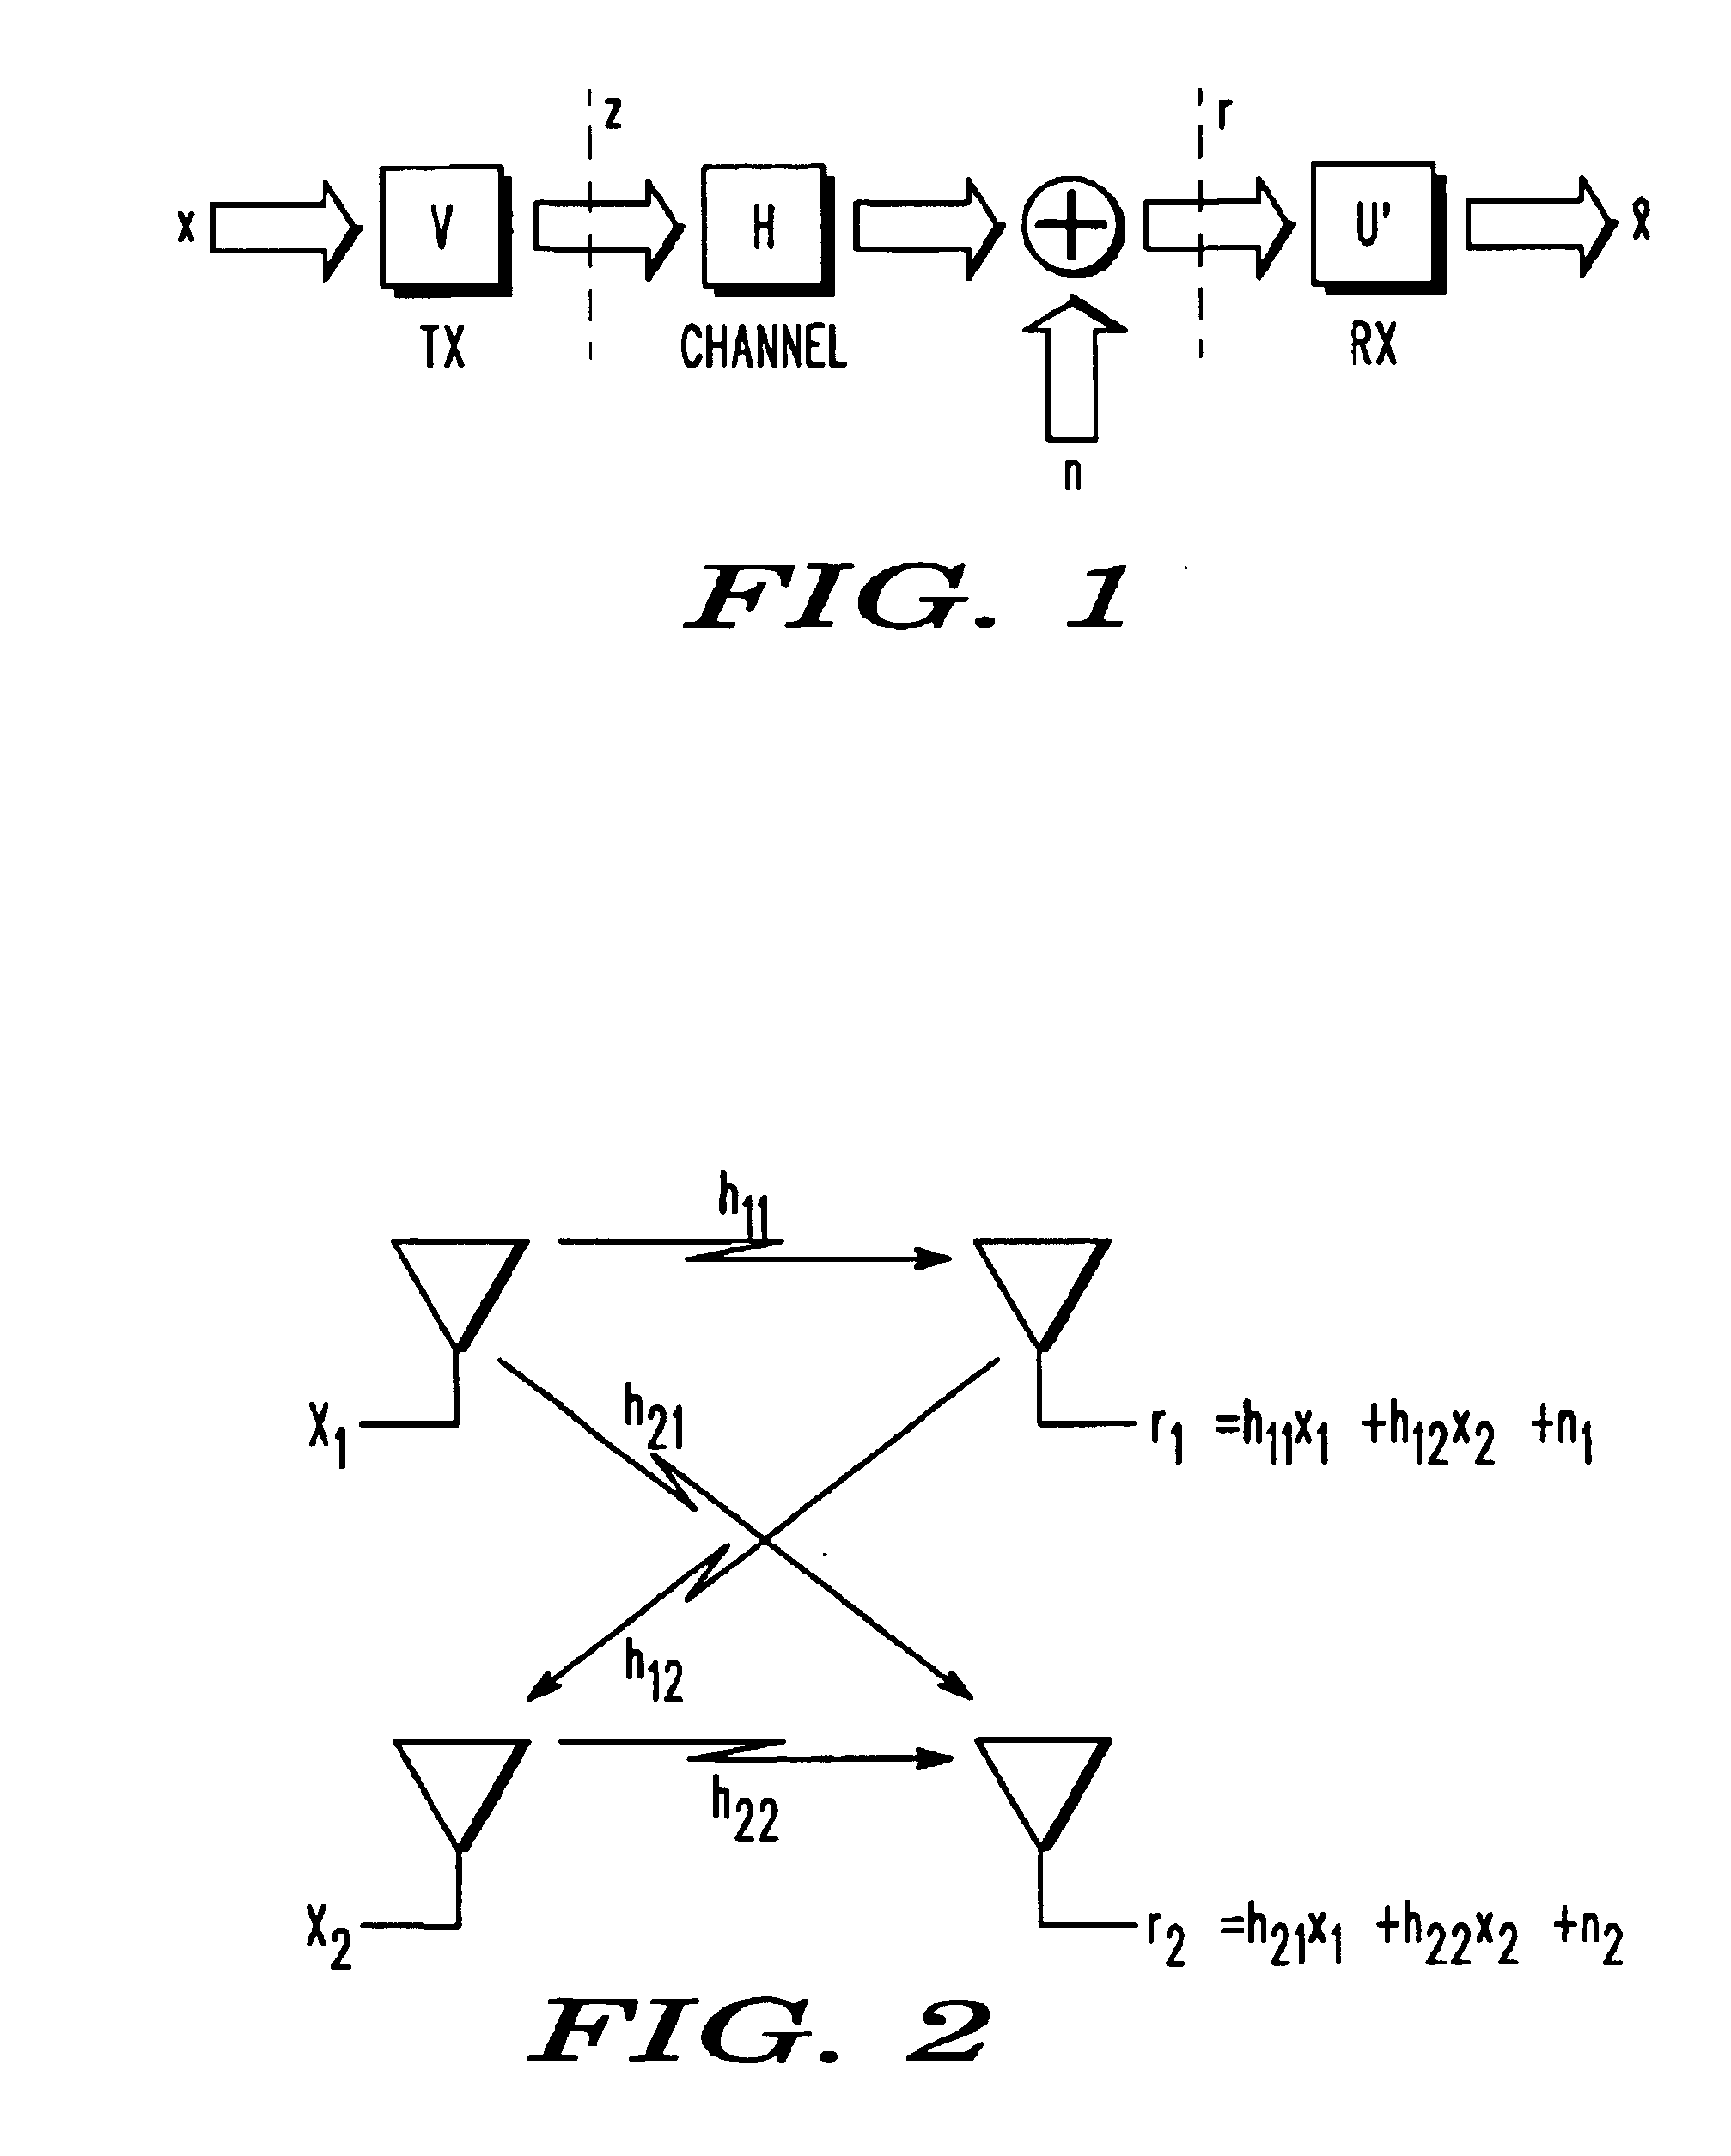 Method and system in a transceiver for controlling a multiple-input, multiple-output communications channel